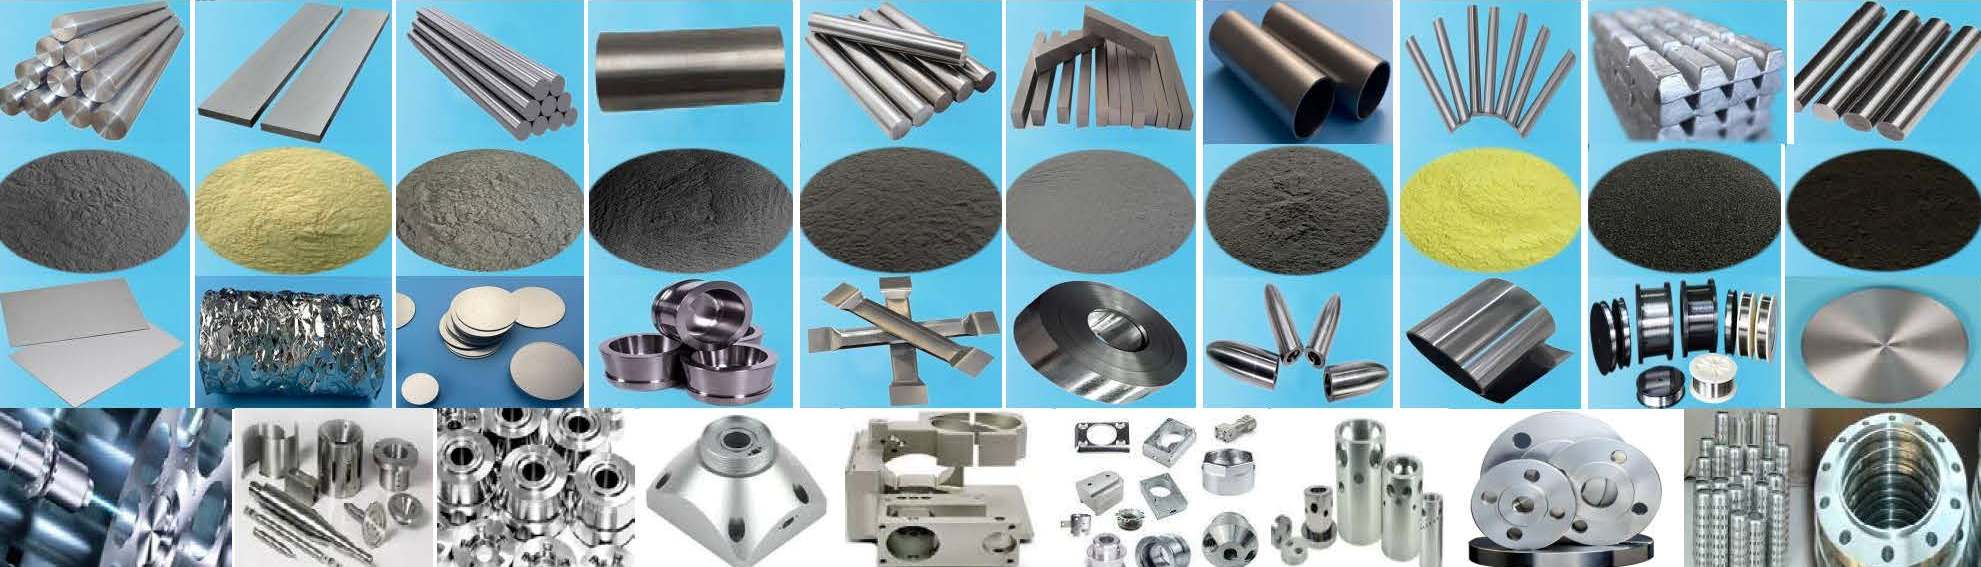 Refractory Material Products